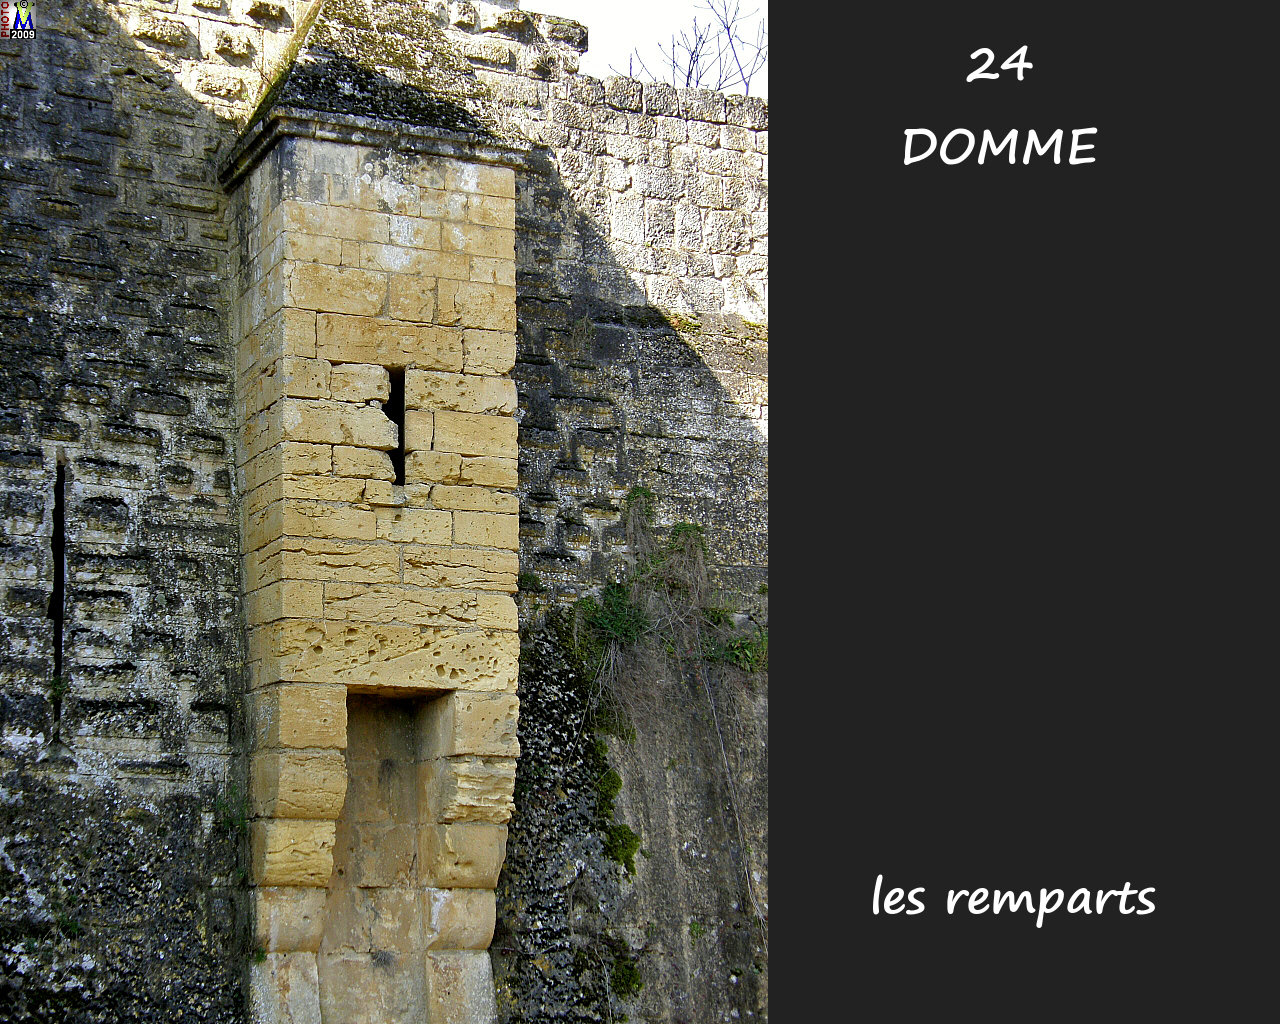 24DOMME_remparts_160.jpg